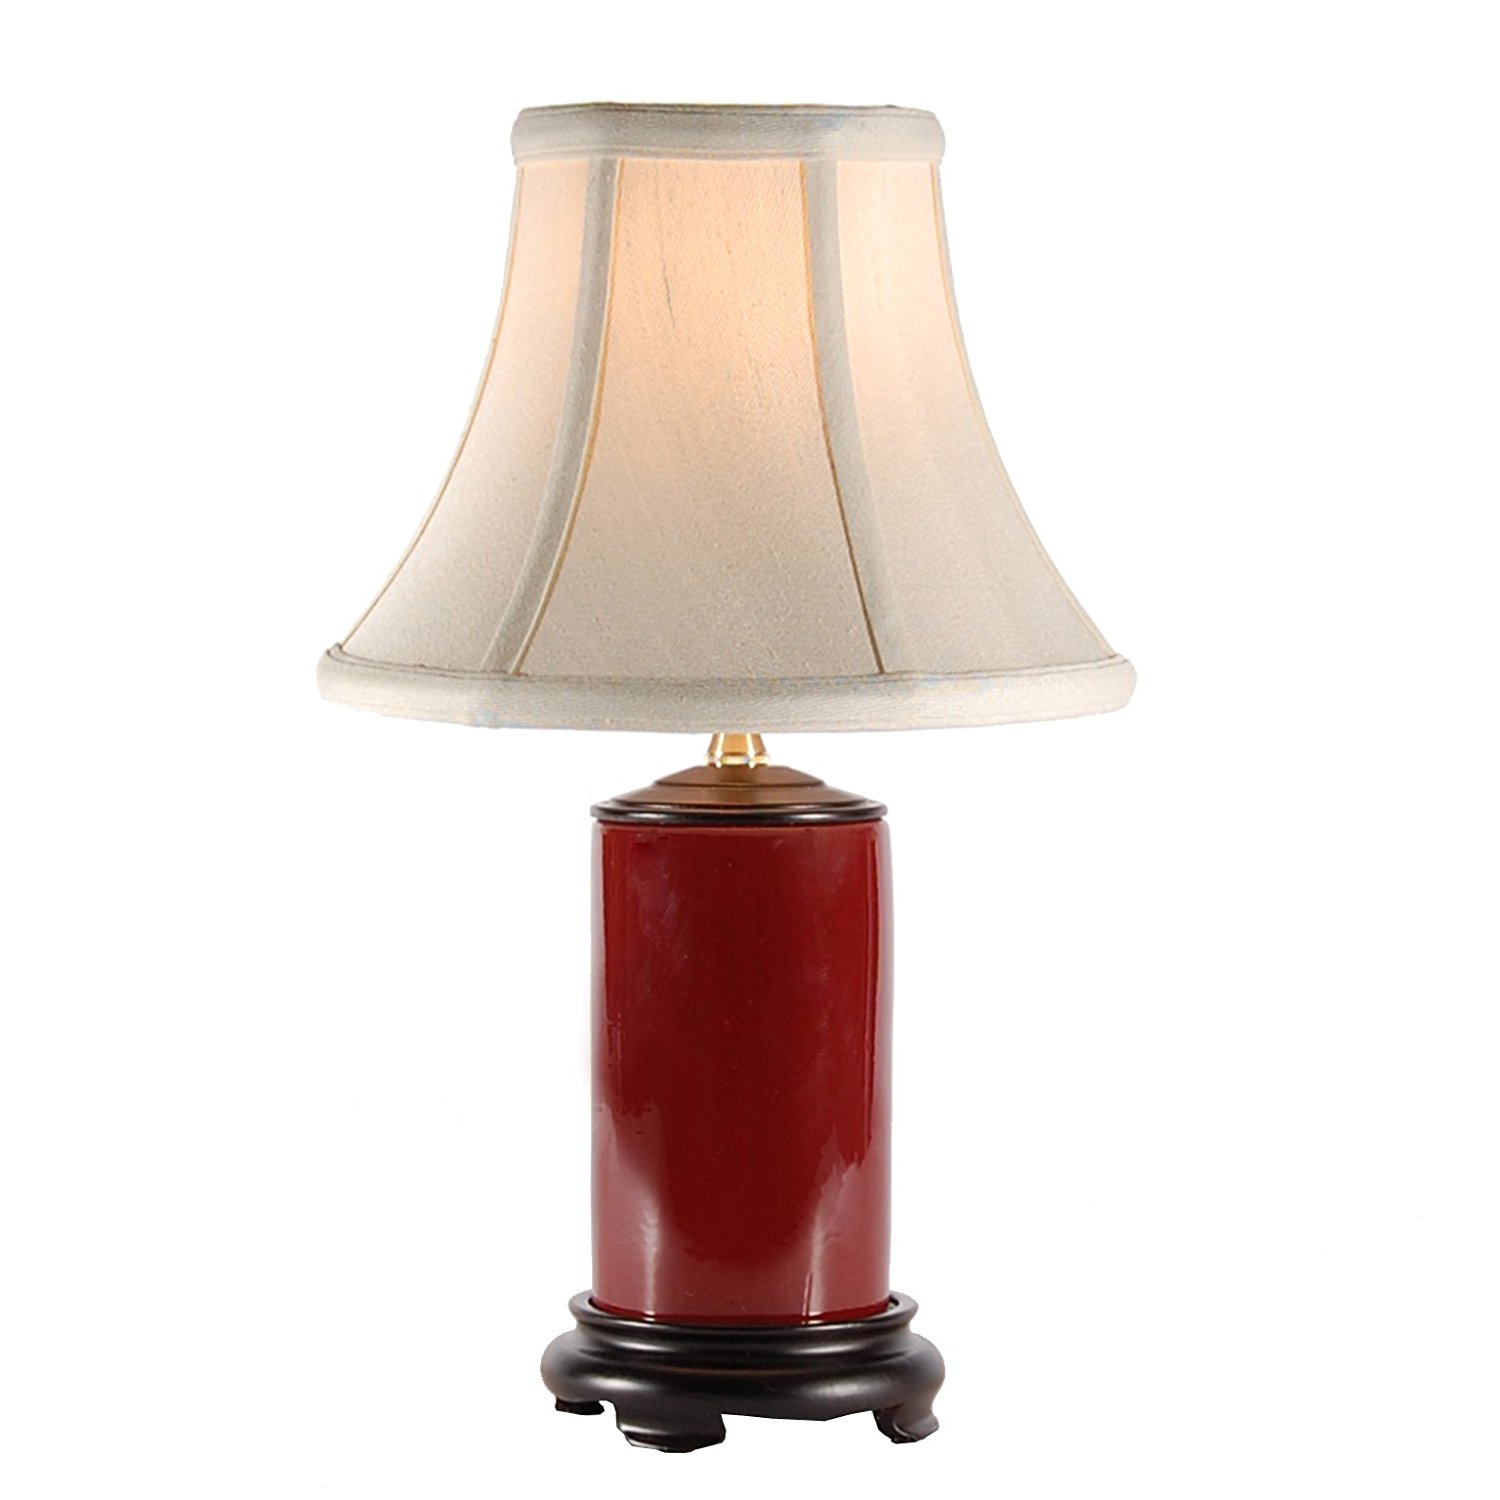 Small Red Porcelain Accent Table Lamp - - Amazon.com